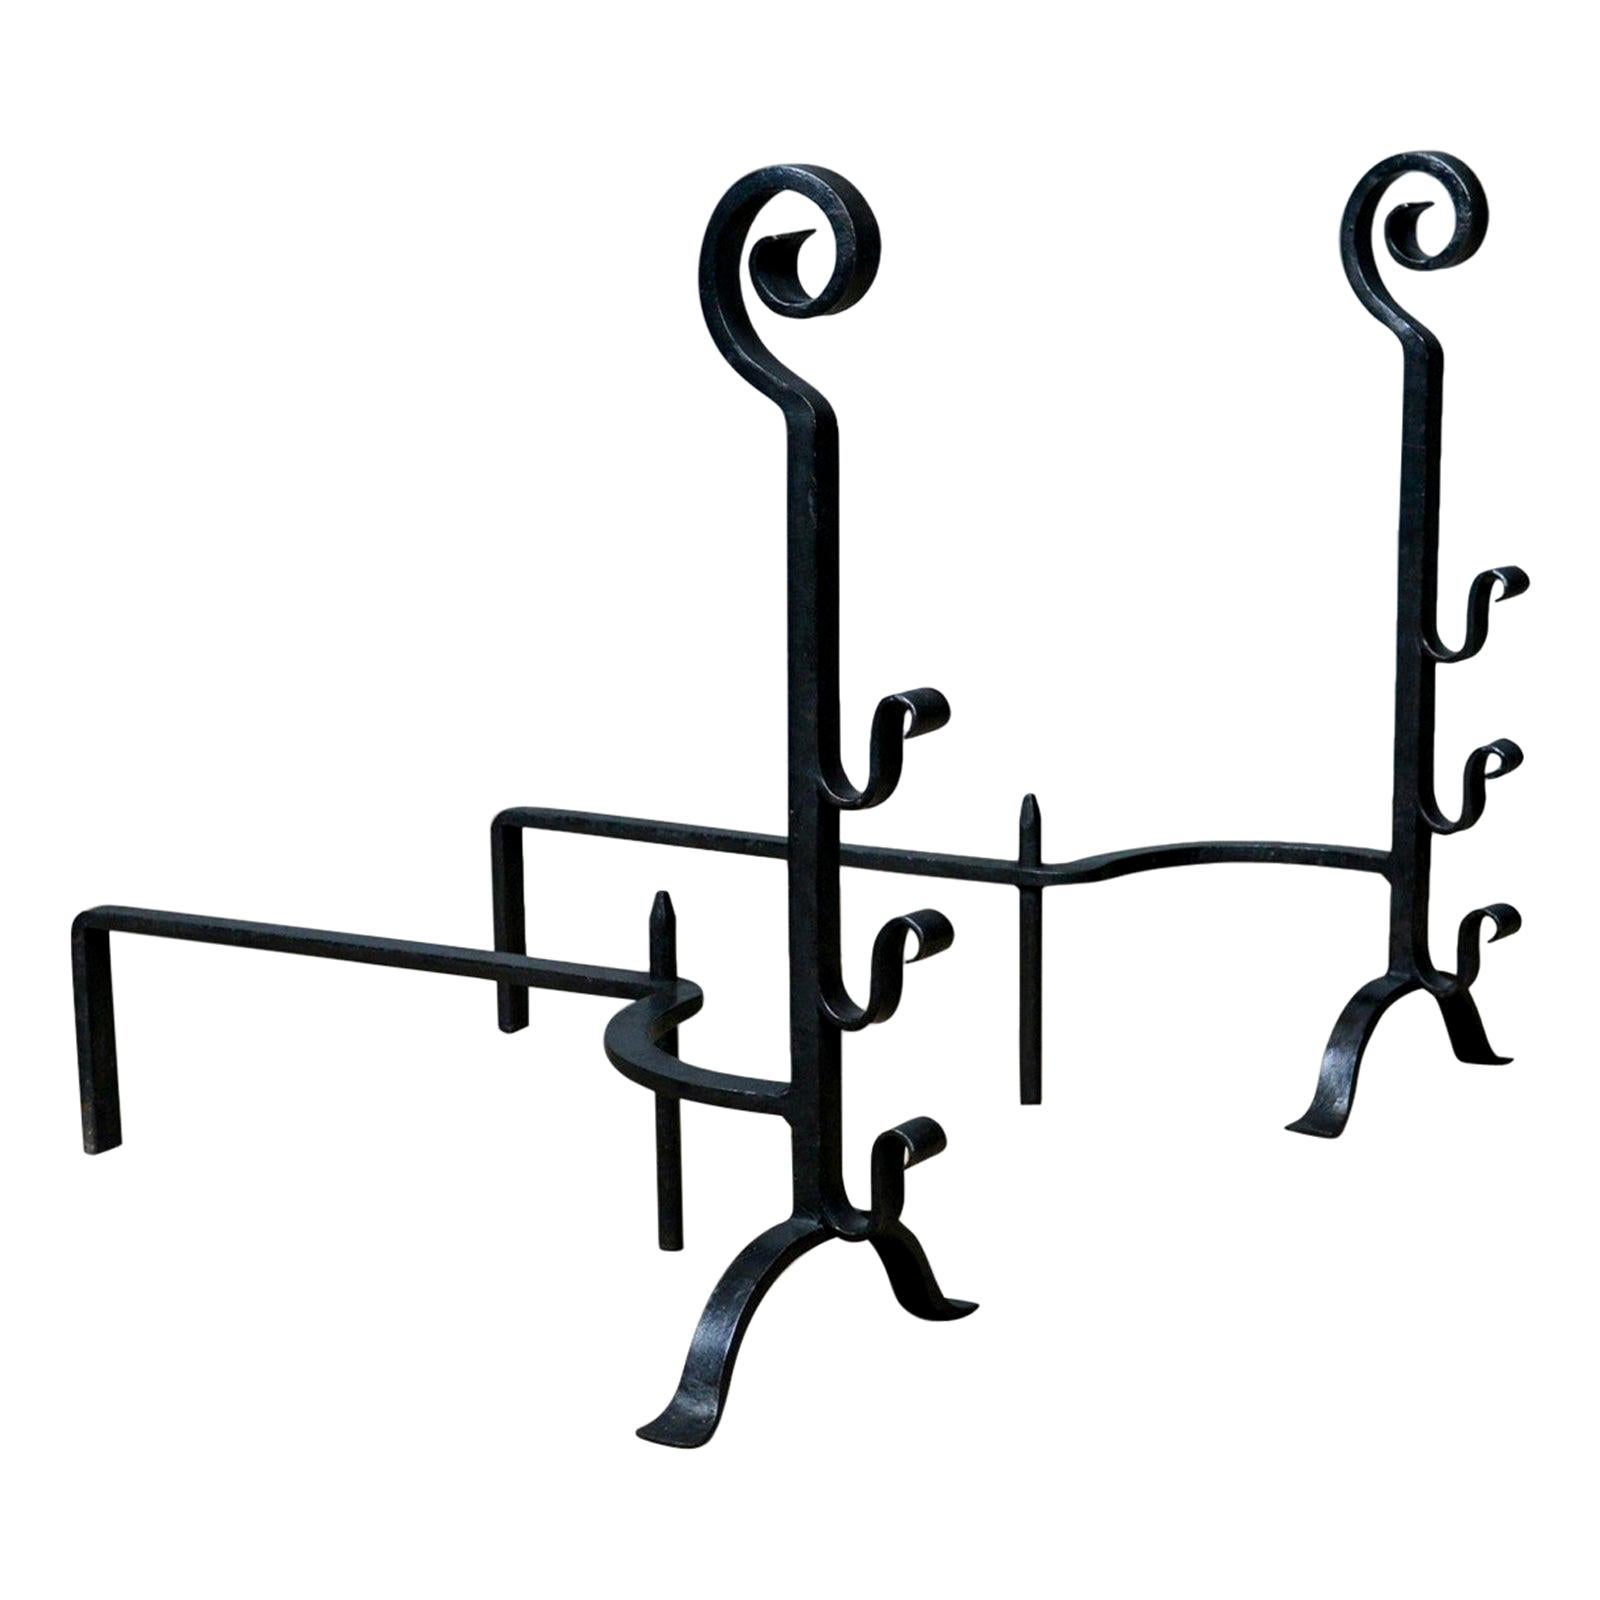 Pair of Large, Gothic, Wrought Iron Fire Dogs, Medieval Revival Andirons